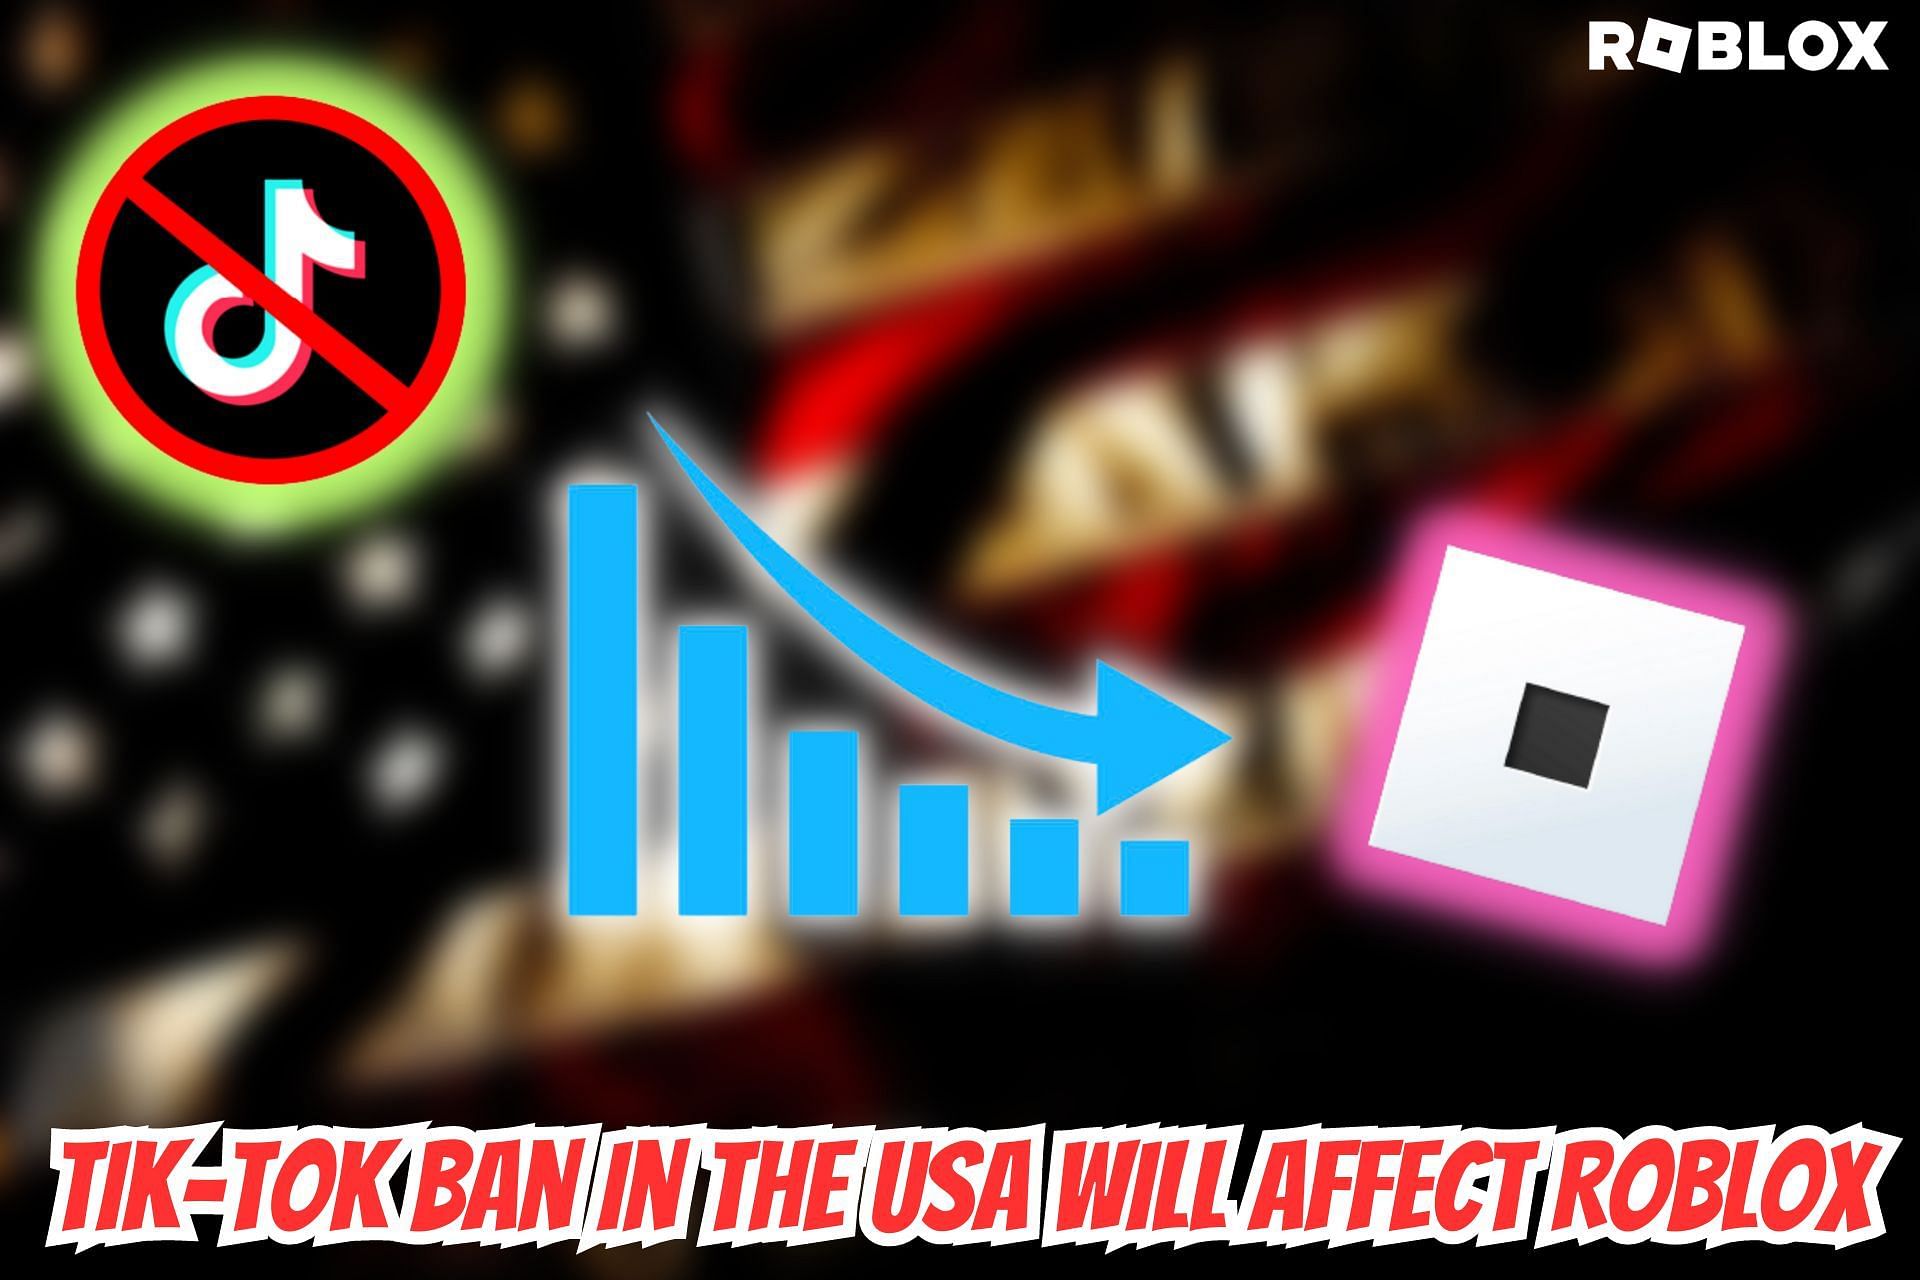 If USA bans tik-tok, the platform will be greatly affected (Image via Roblox)